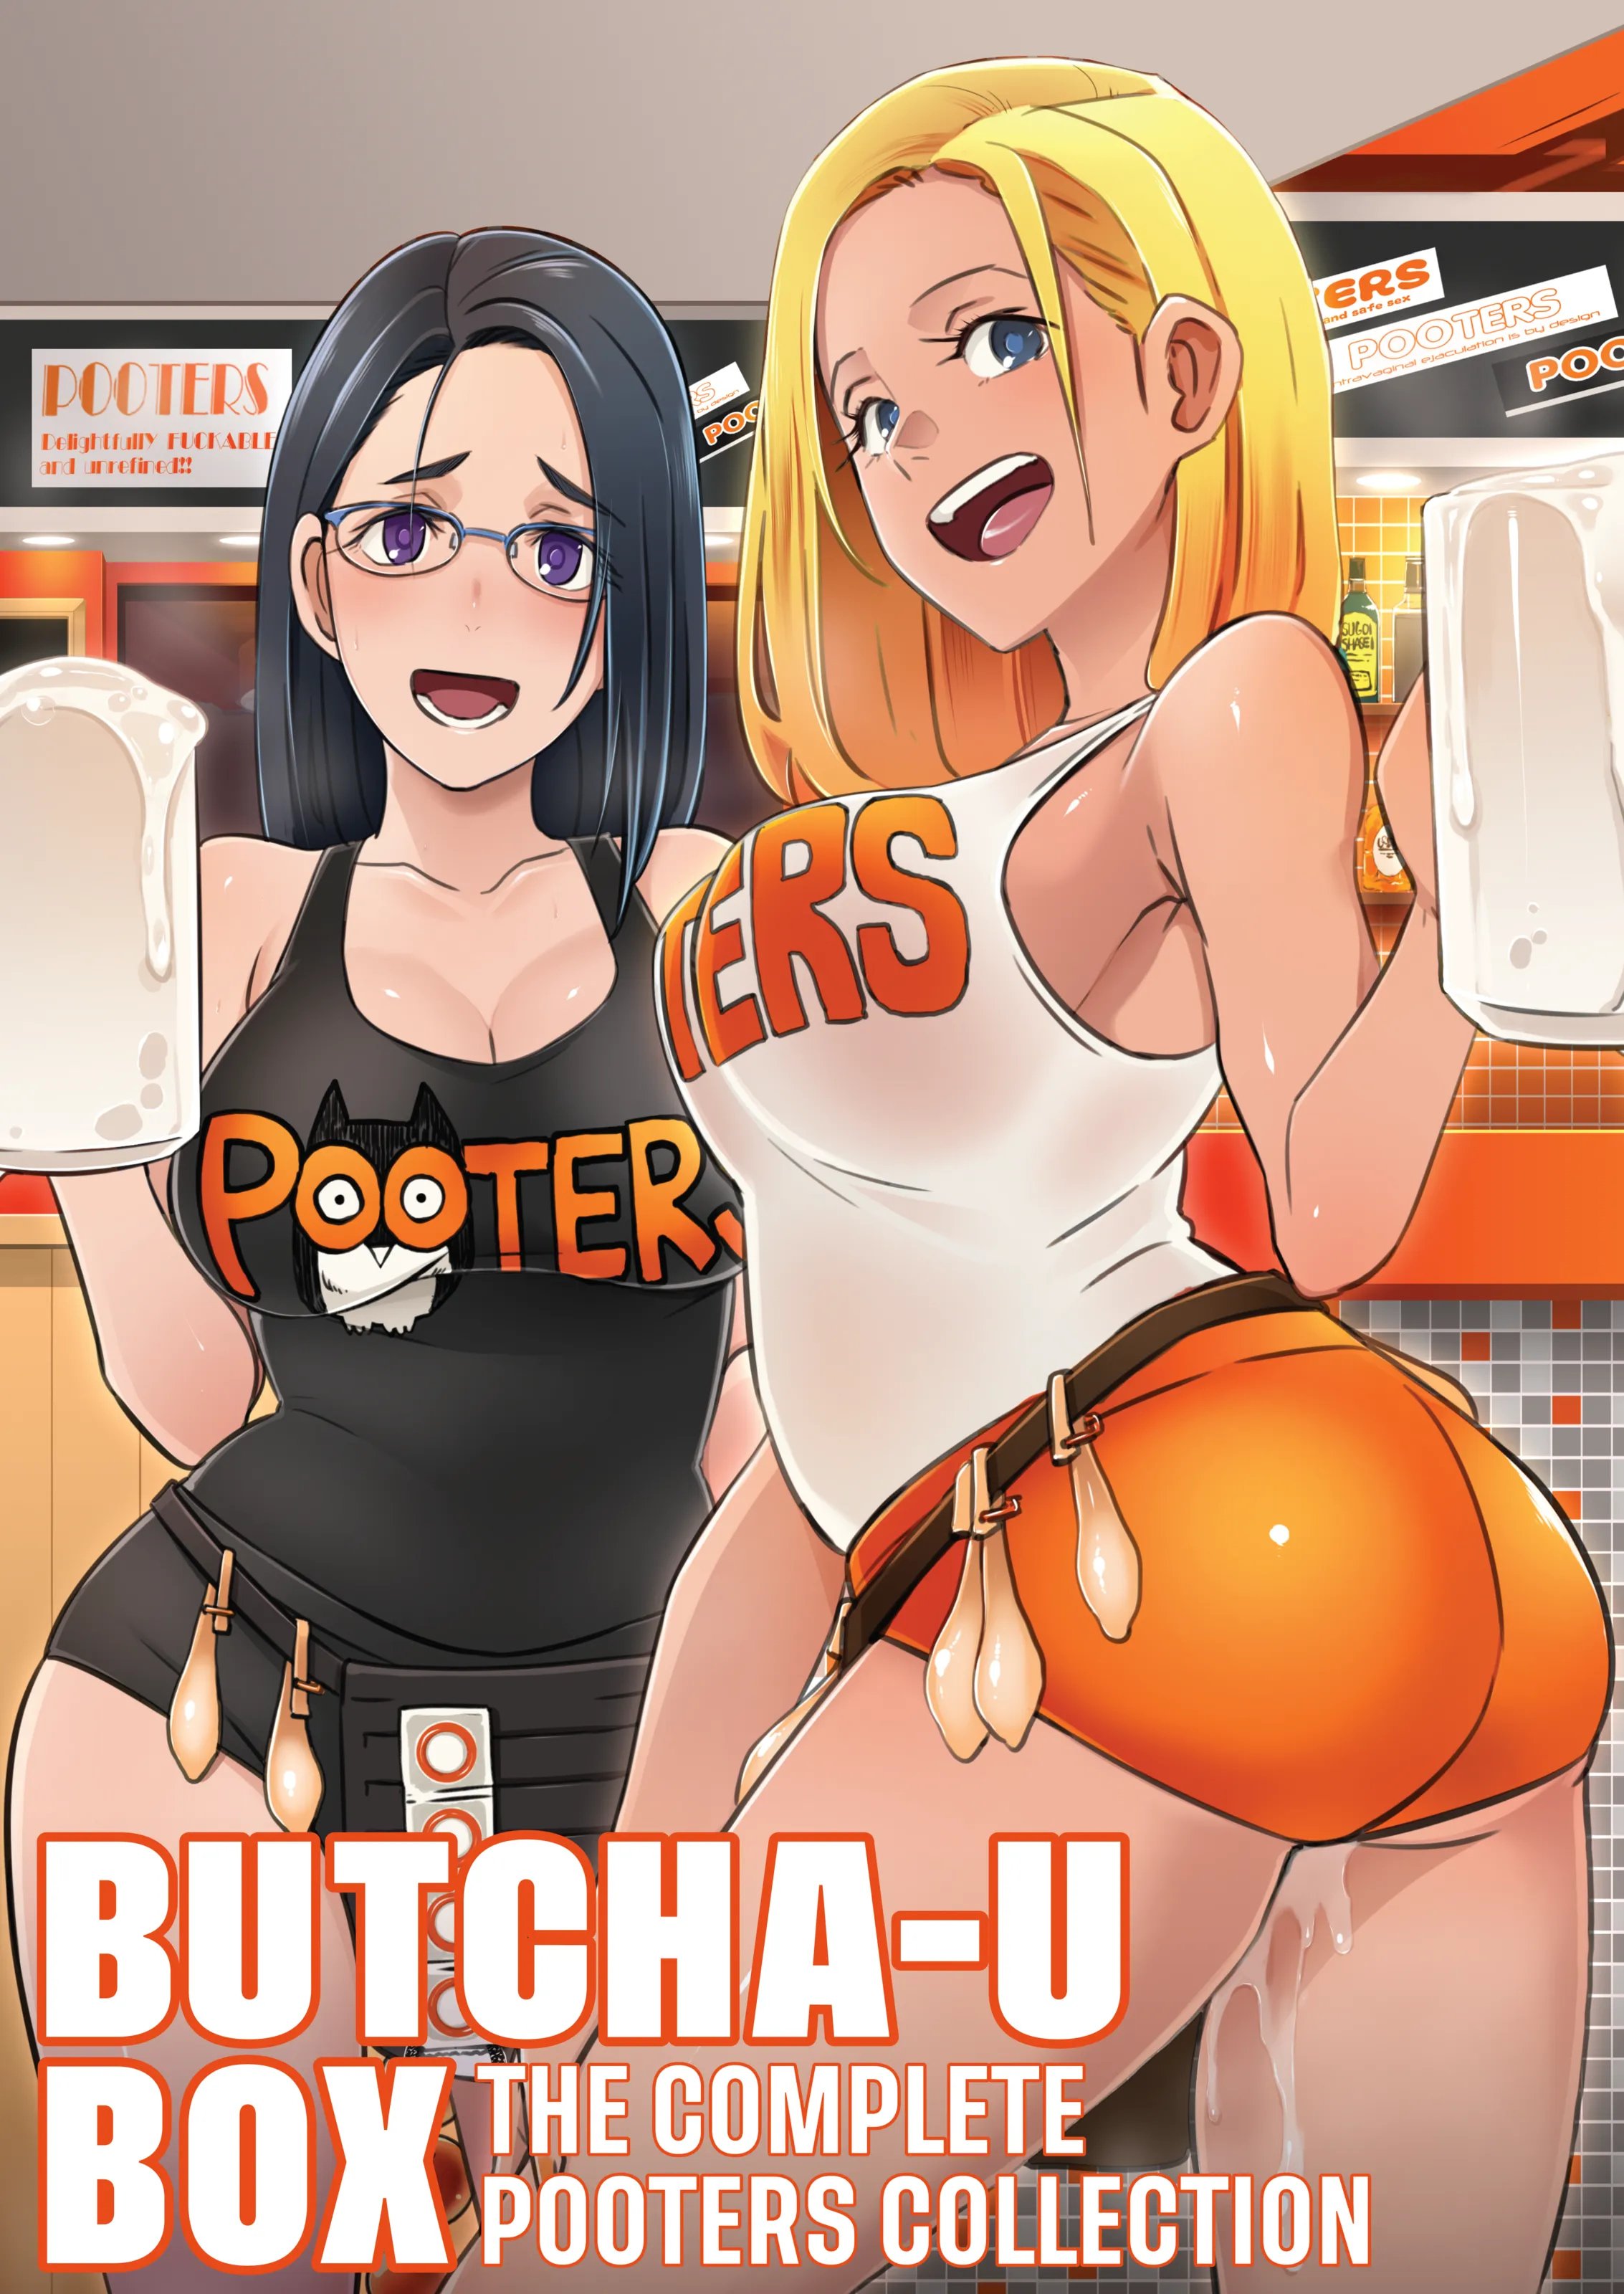 [butcha-u] Butcha-U Box The Complete POOTERS Collection [英訳] [無修正] [DL版]｜[EROQUIS! (ブッチャーU)] DELIGHTFULLY FUCKABLE AND UNREFINED ALL YOU CAN SEX!